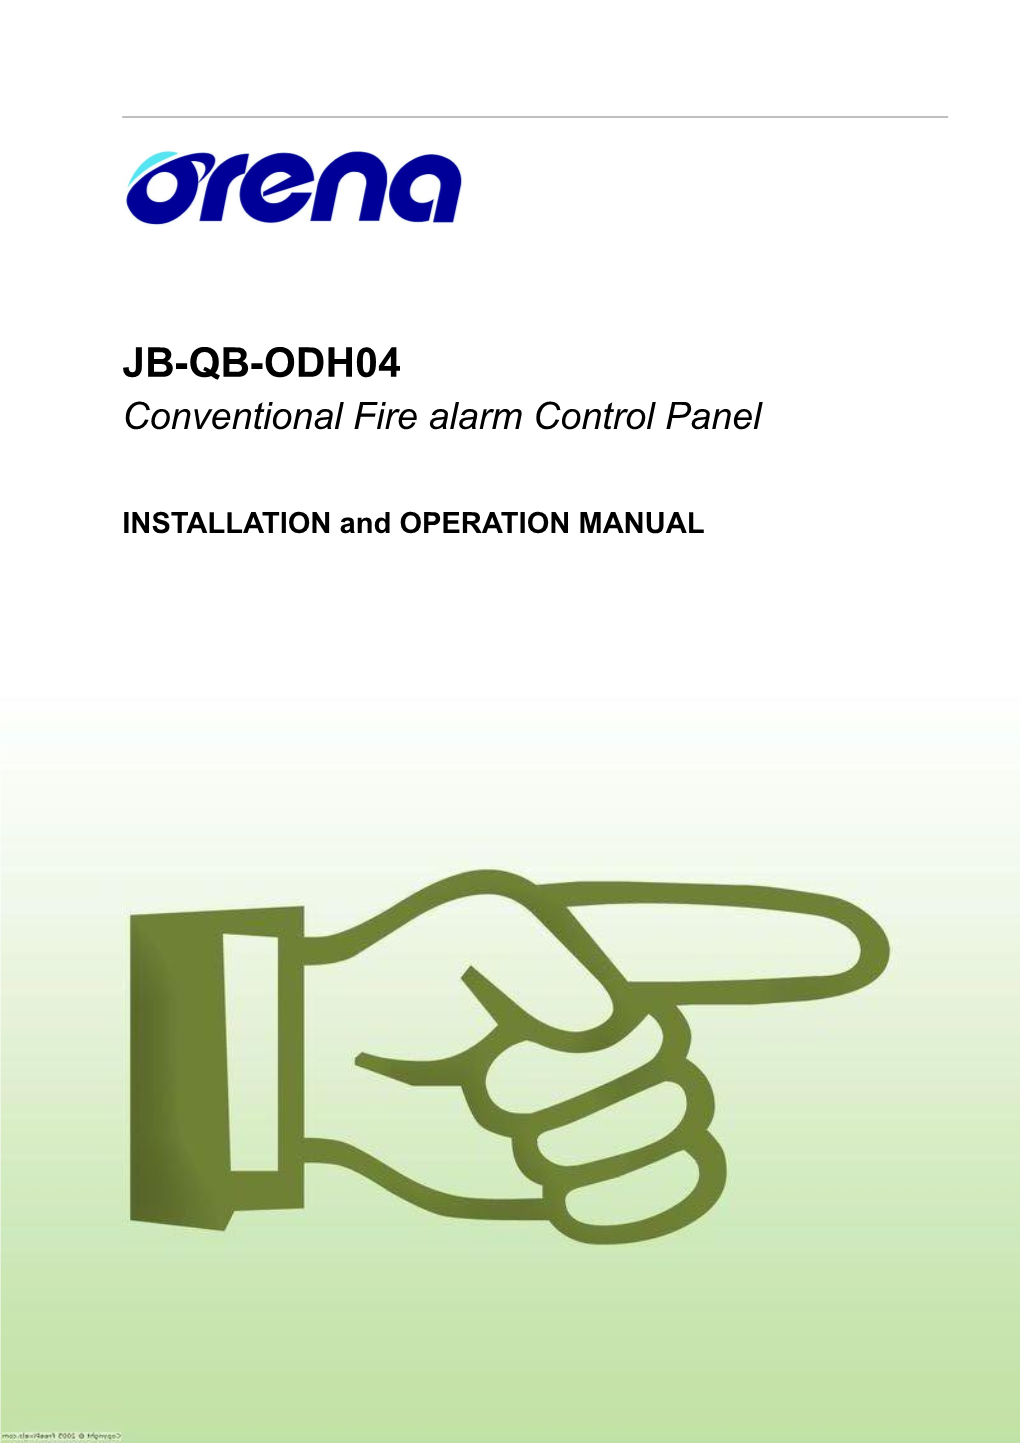 INSTALLATION and OPERATION MANUAL s1